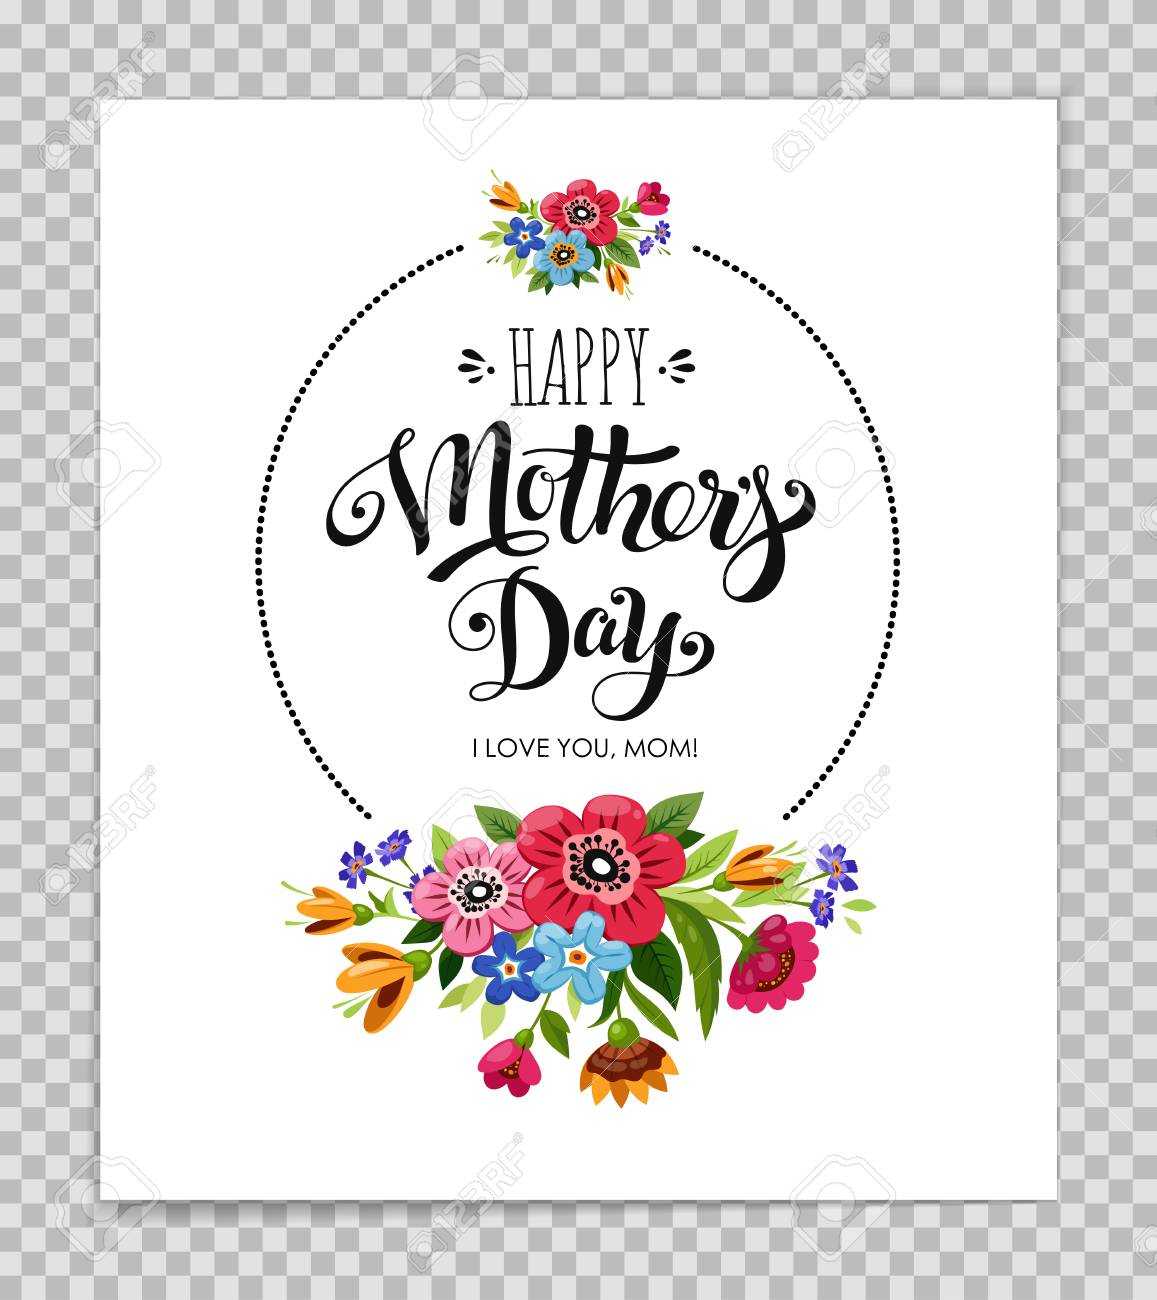 Mothers Day Card Template With Floral Design On Transparent Background. For Mothers Day Card Templates